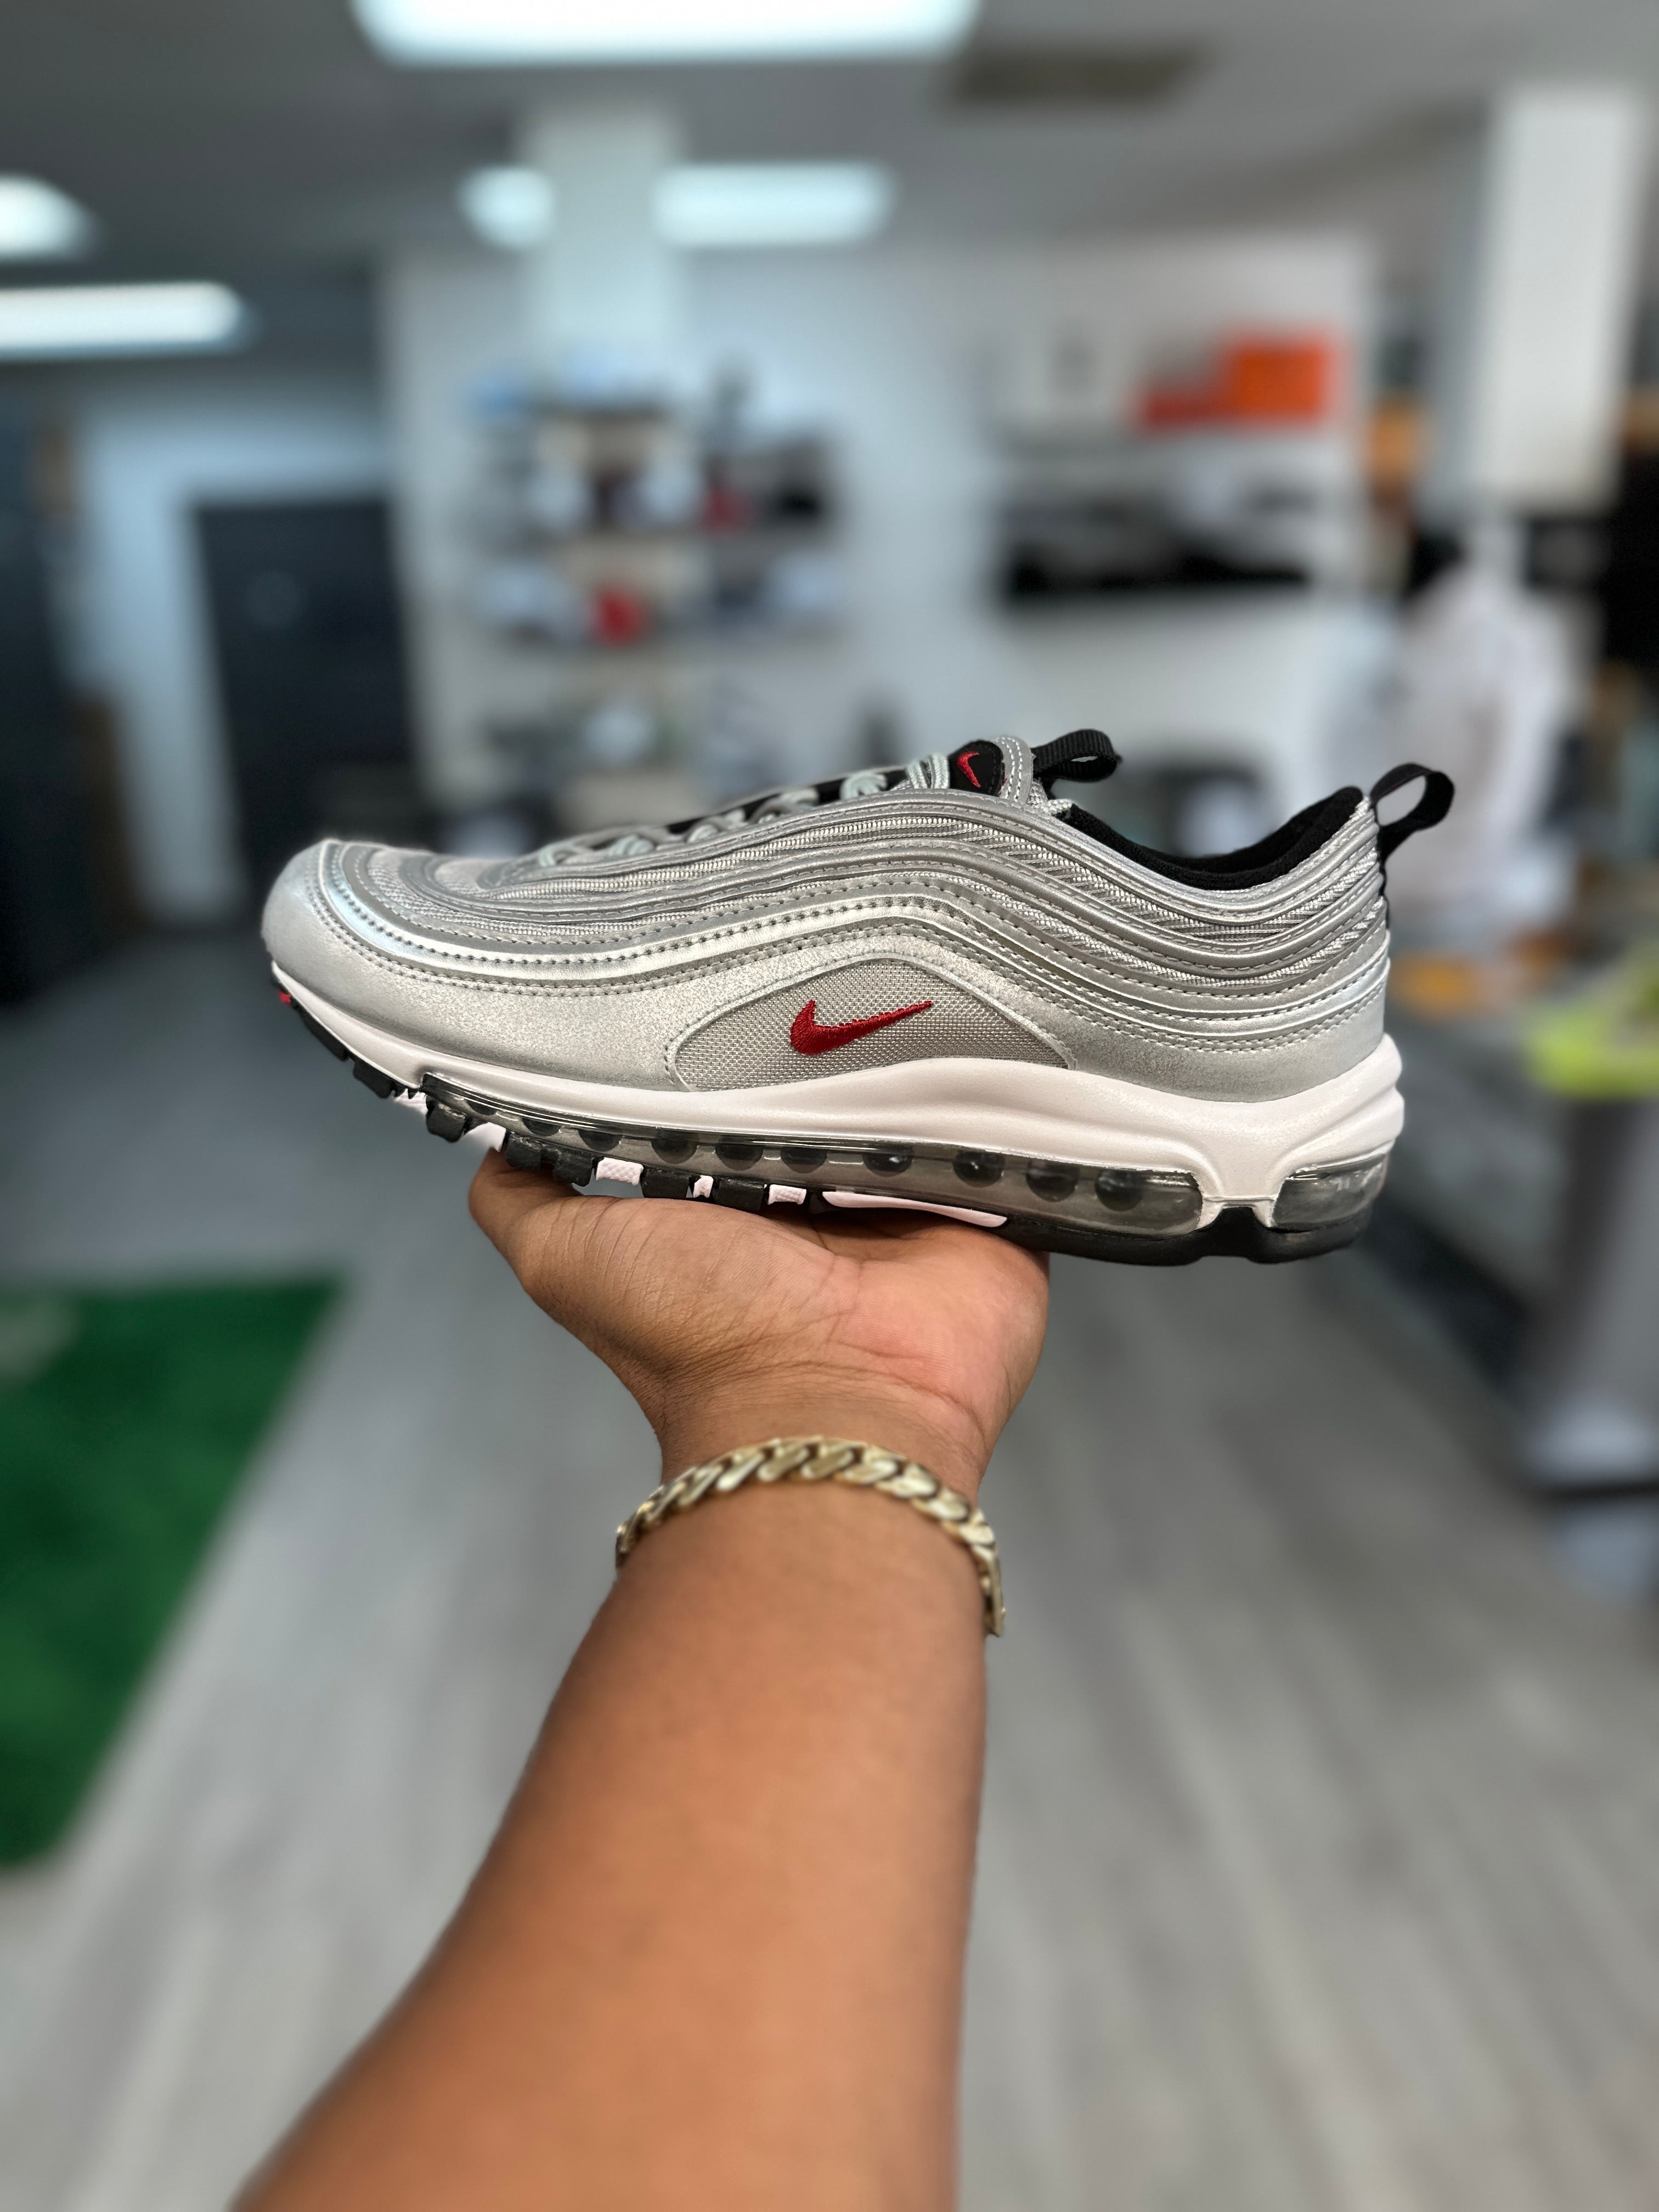 Sensible diseño madre OG Silver Bullet Nike Air Max 97 - Luxuries By Luck